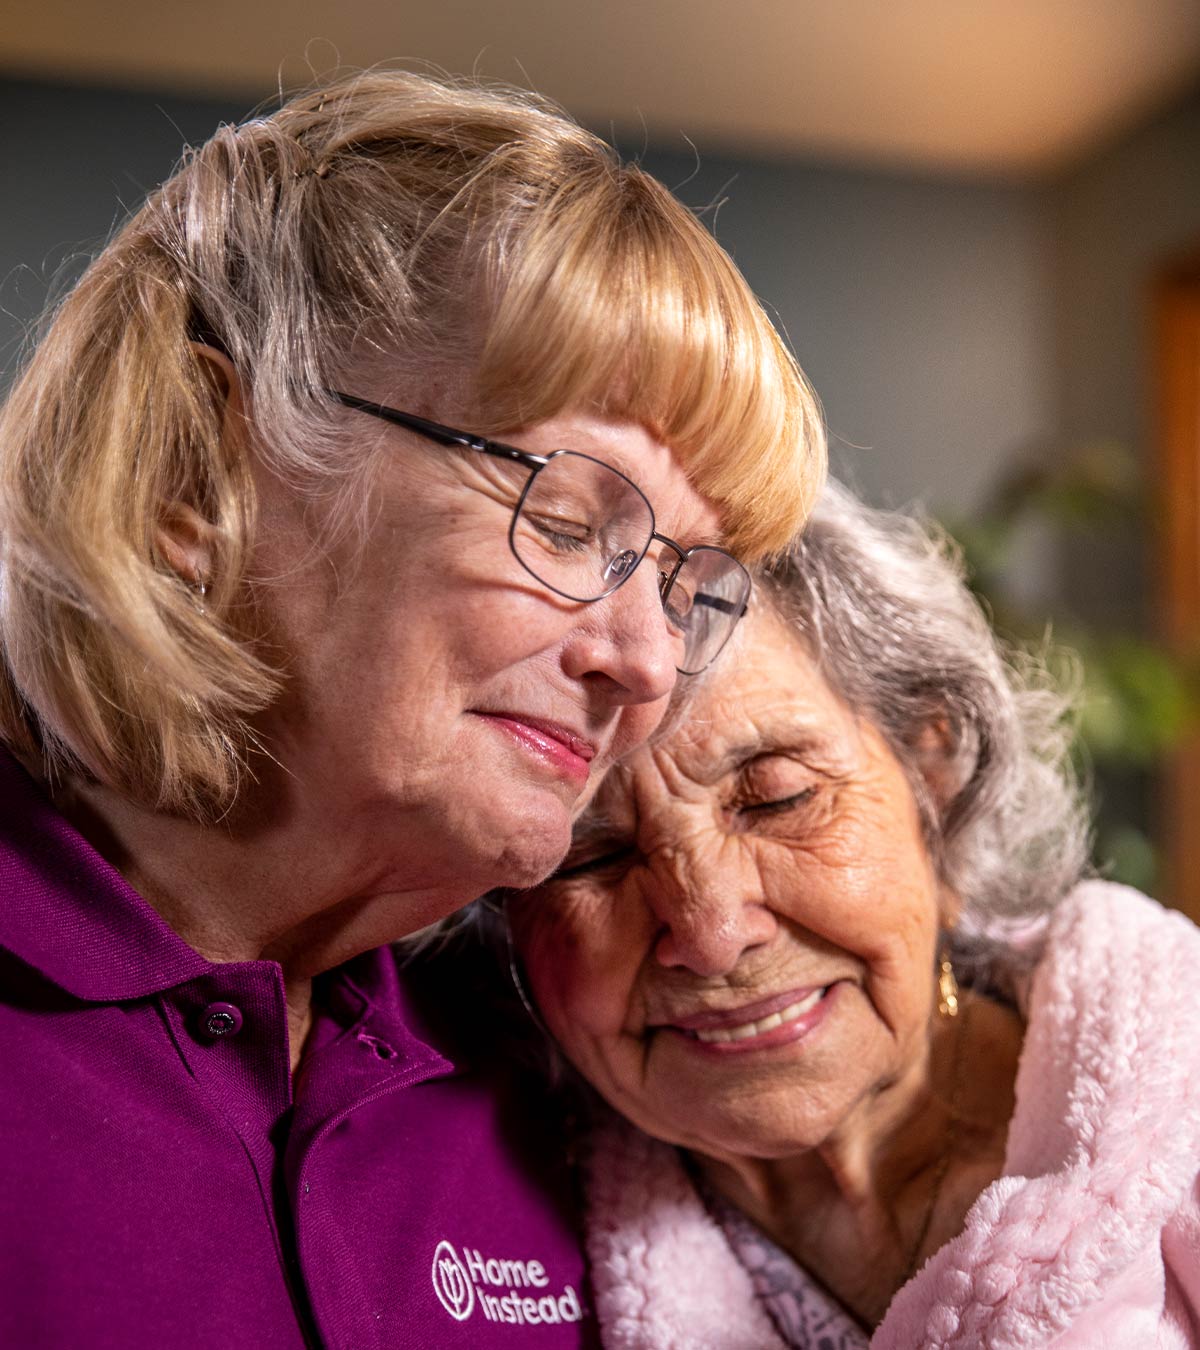 CAREGiver providing in-home senior care services. Home Instead of Whitehall, PA provides Elder Care to aging adults. 